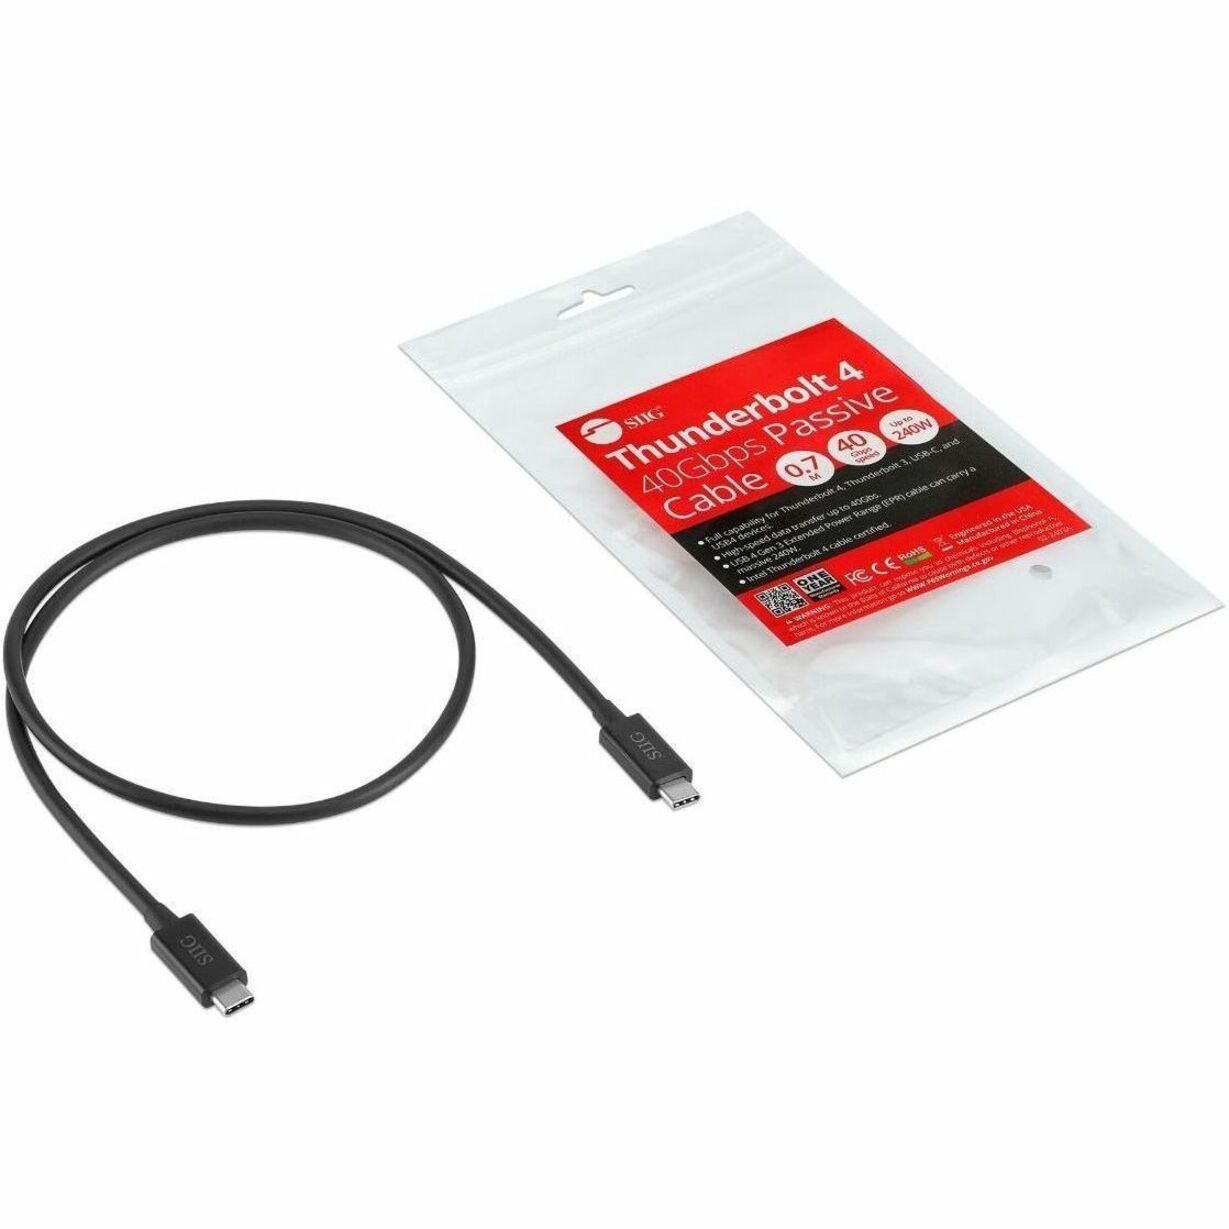 SIIG CB-TB0211-S1 Thunderbolt 4 Data Transfer Cable, High-Speed Connectivity